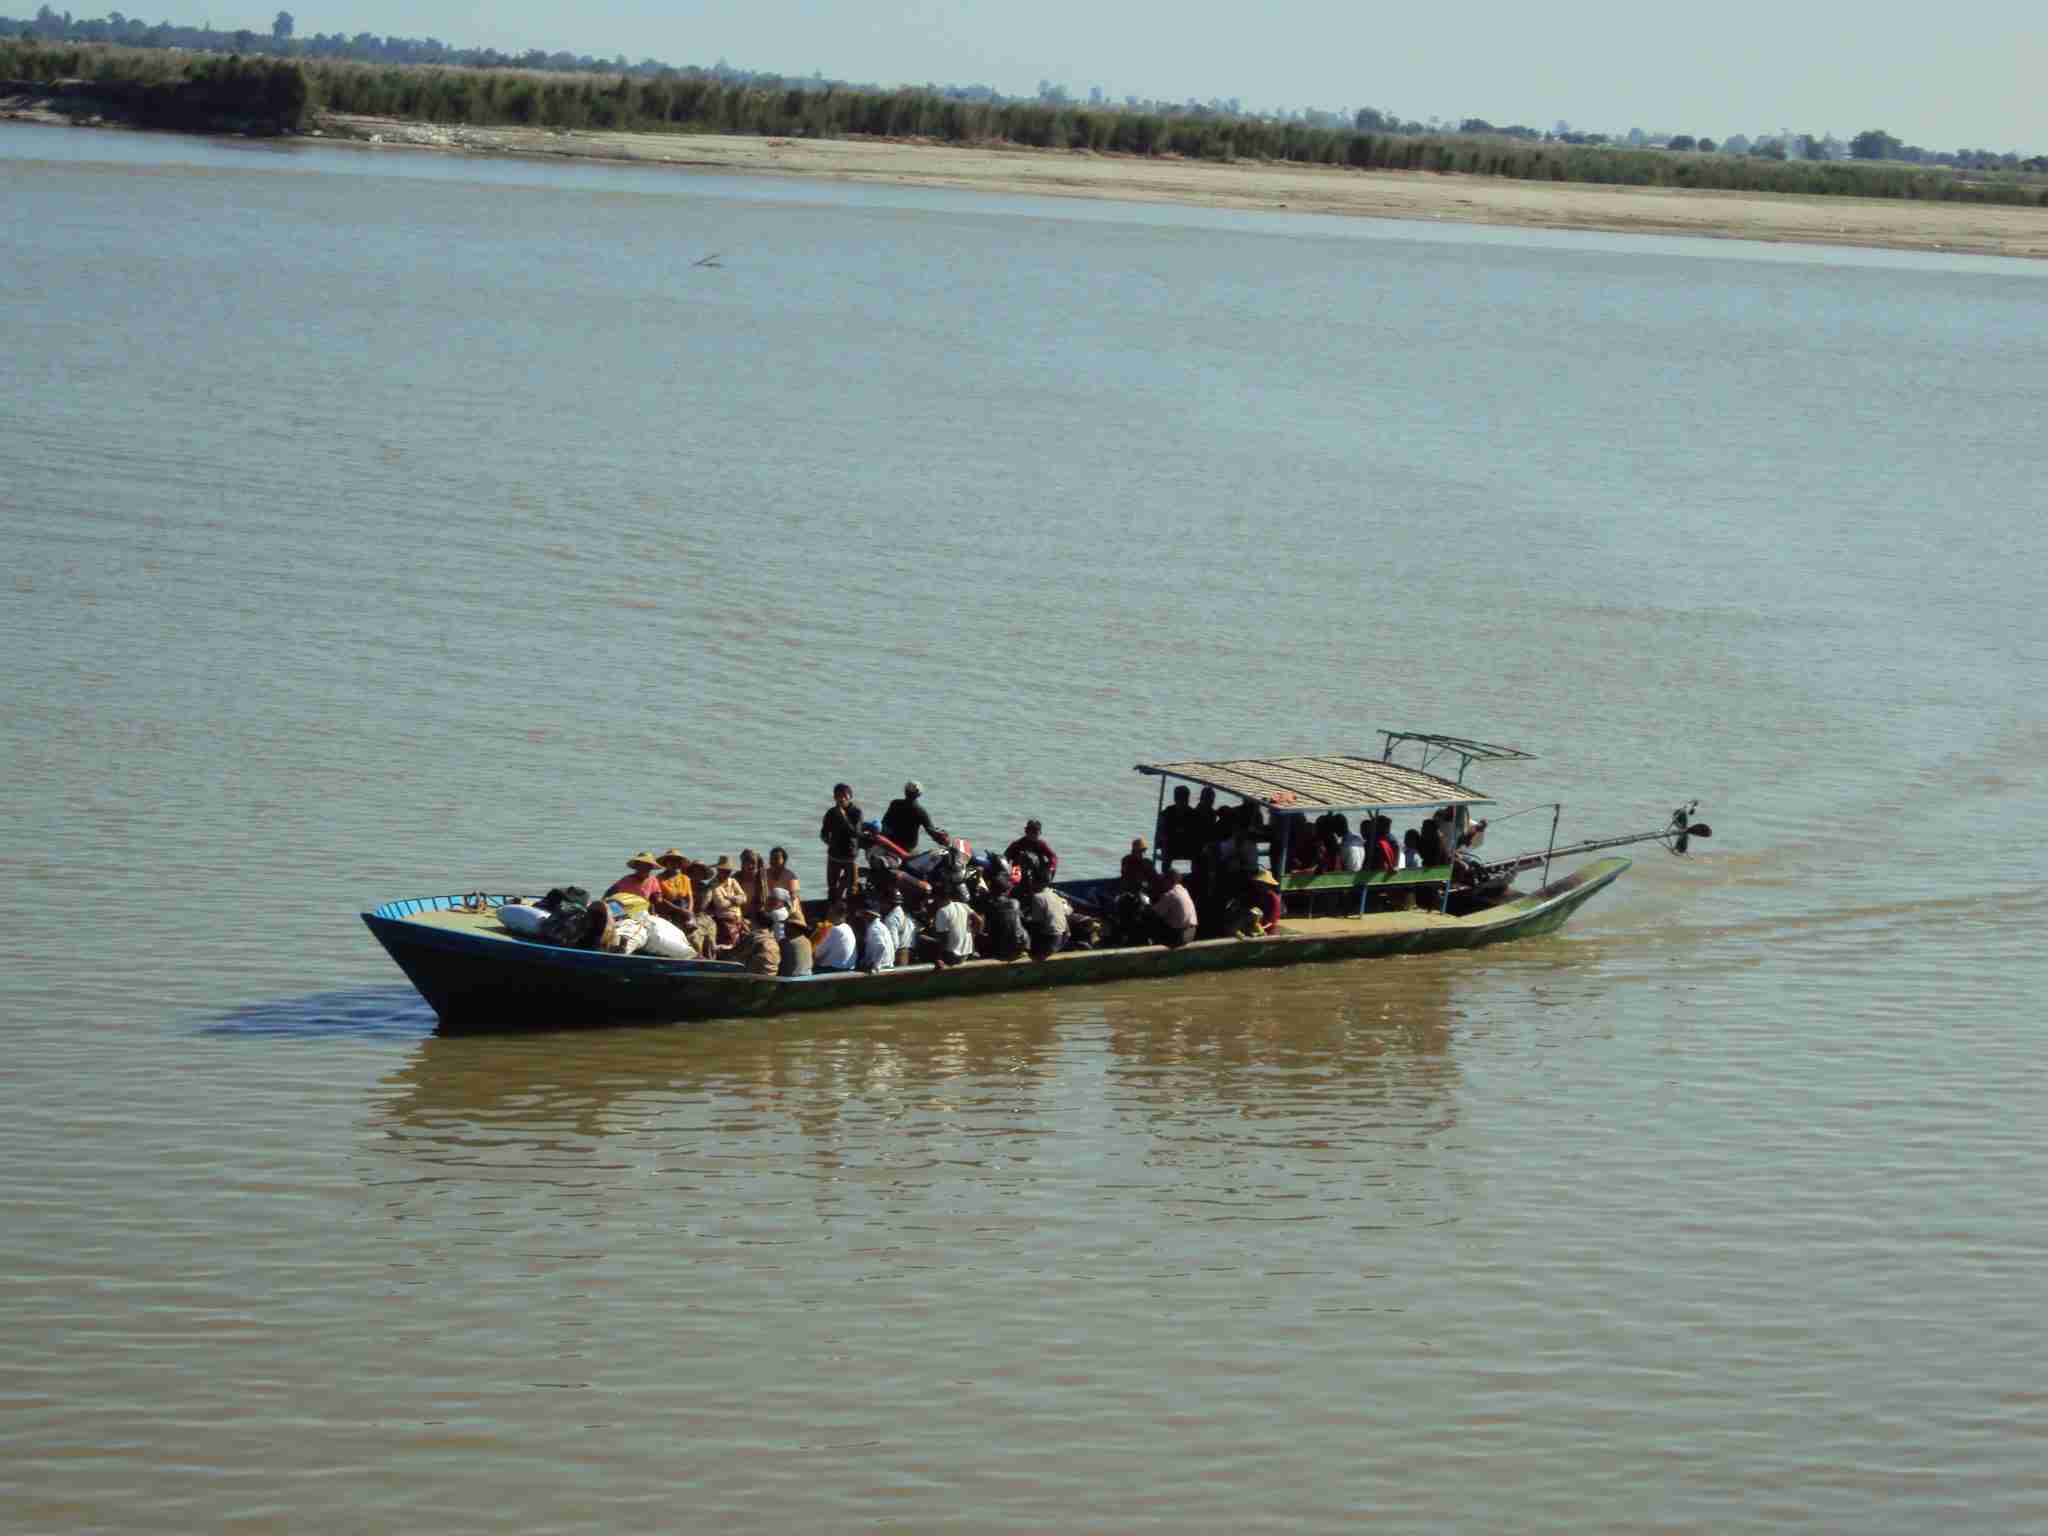 Boats on the Irrawaddy